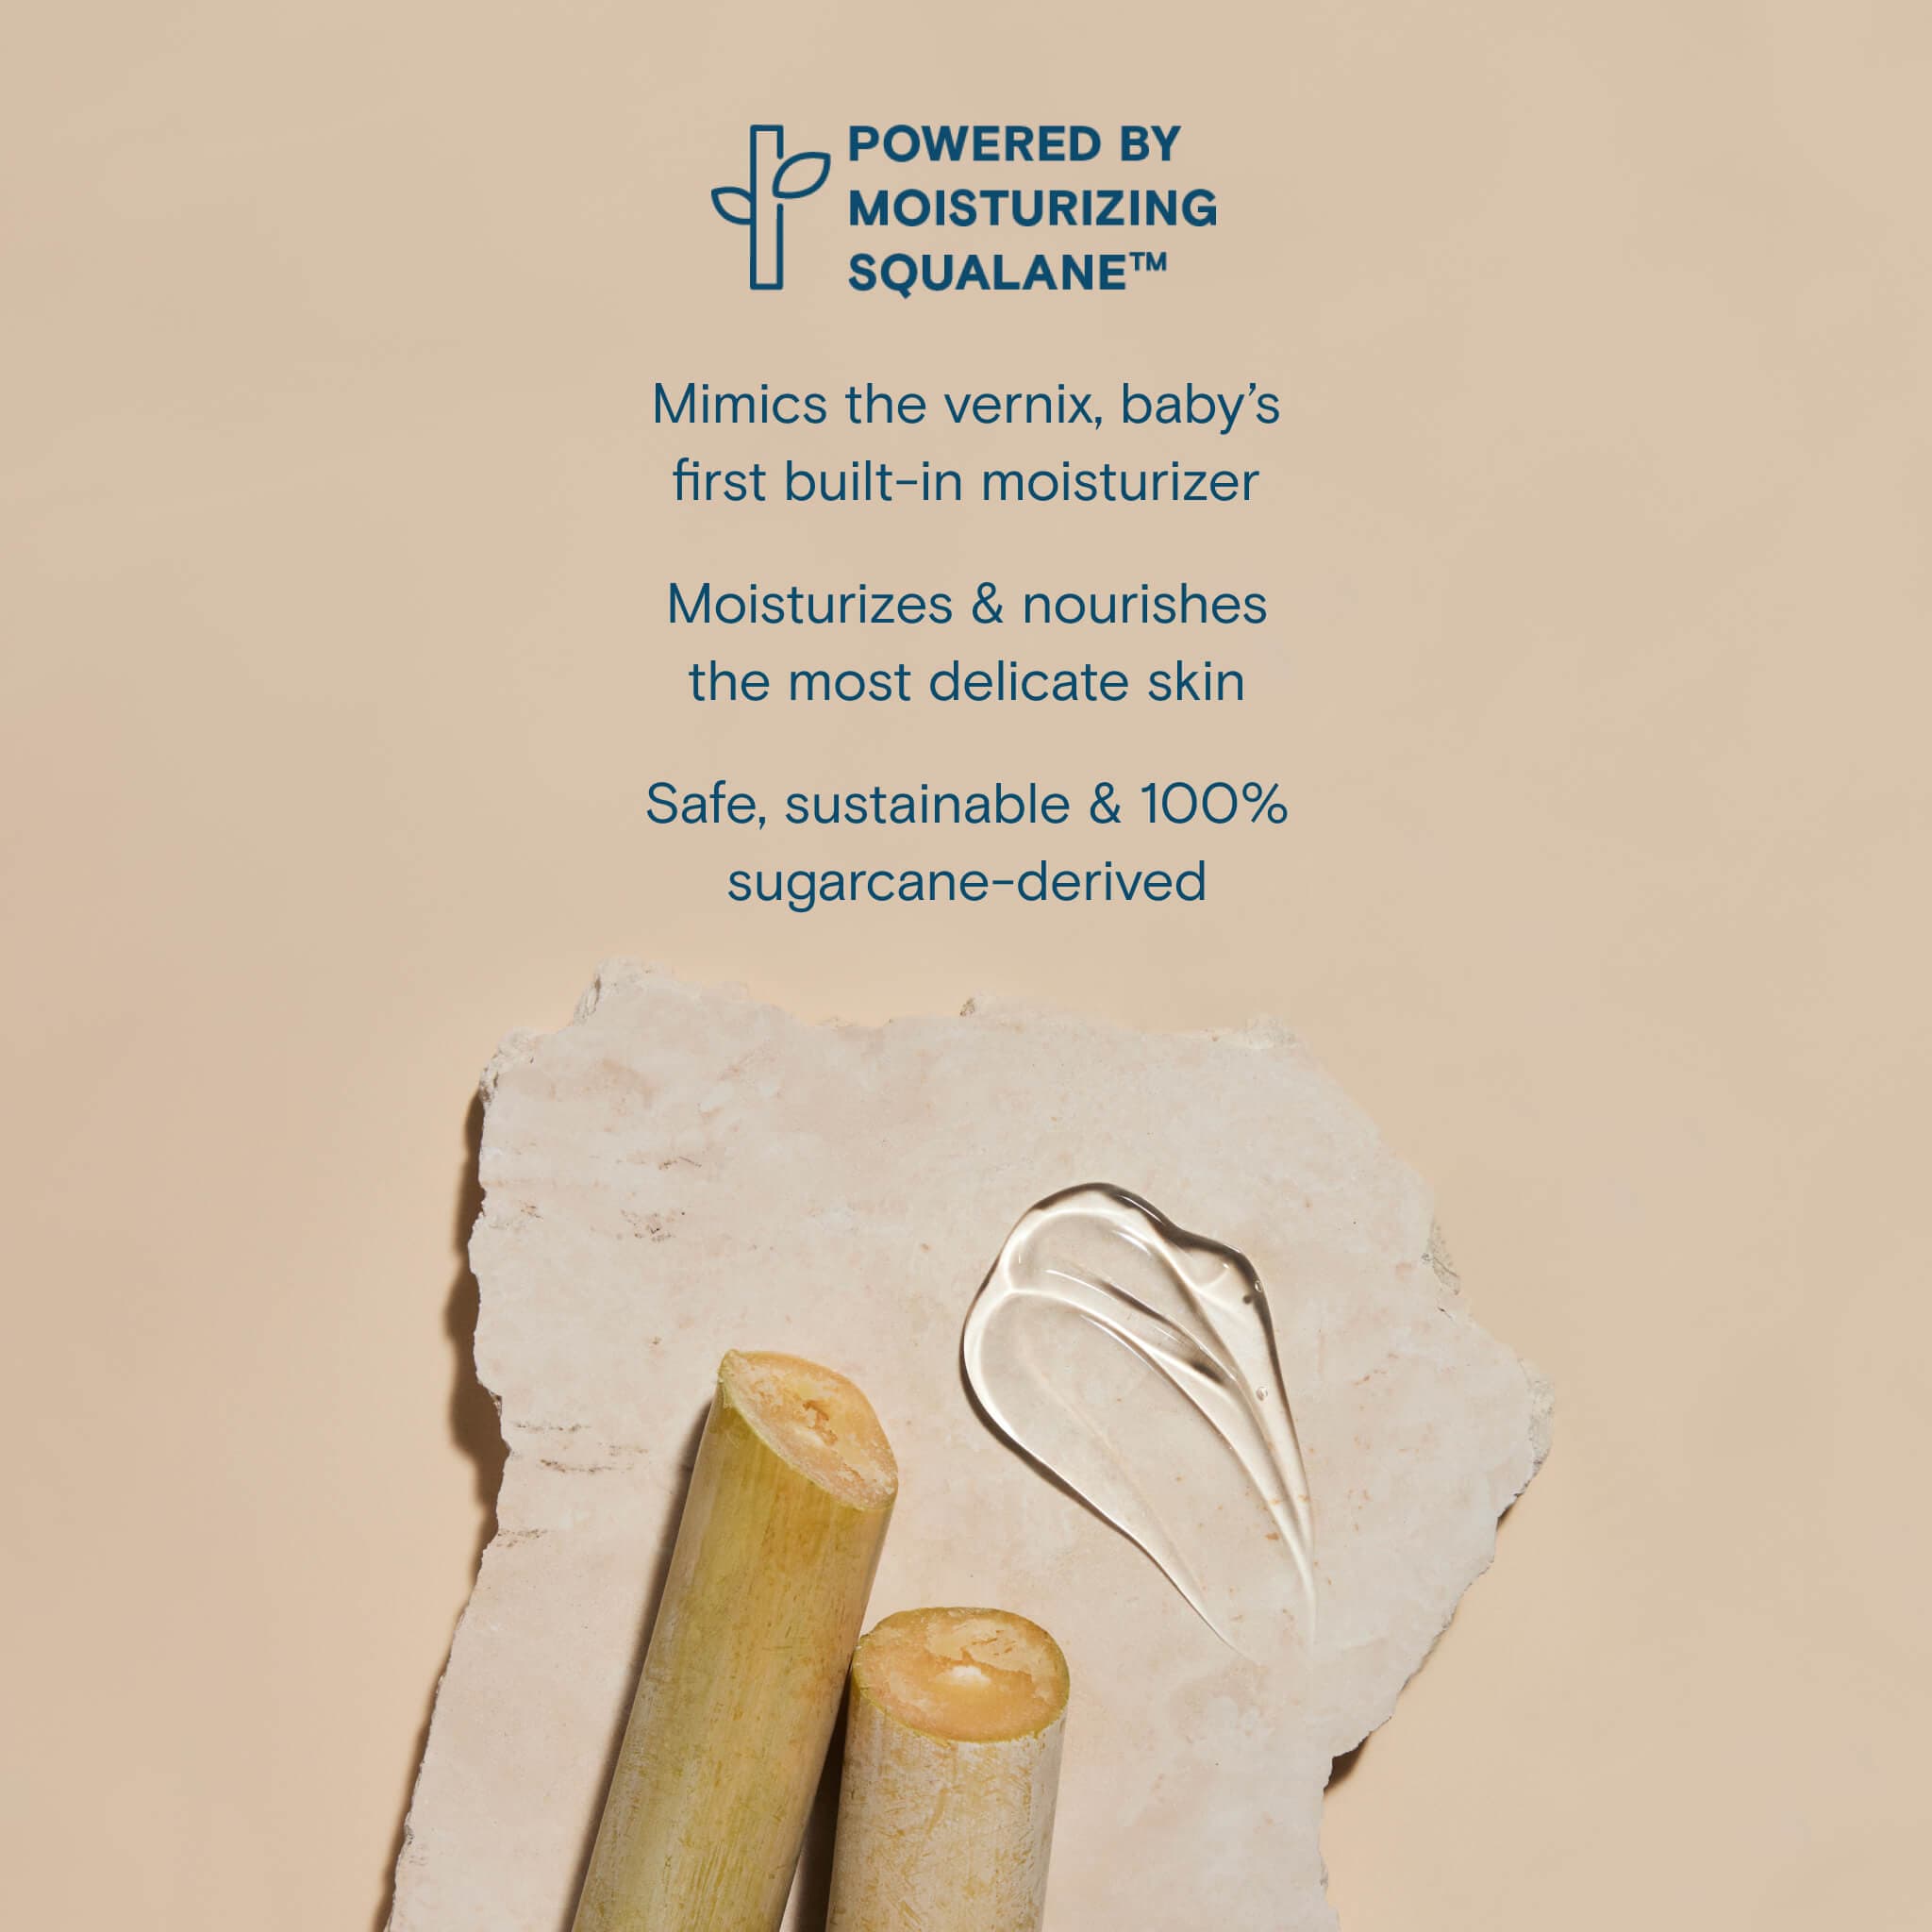 Powered by Moisturizing Squalane. Mimics the vernix, baby's first built-in moisturizer. Moisturizes & nourishes the most delicate skin. Safe, sustainable & 100% sugarcane-derived. 